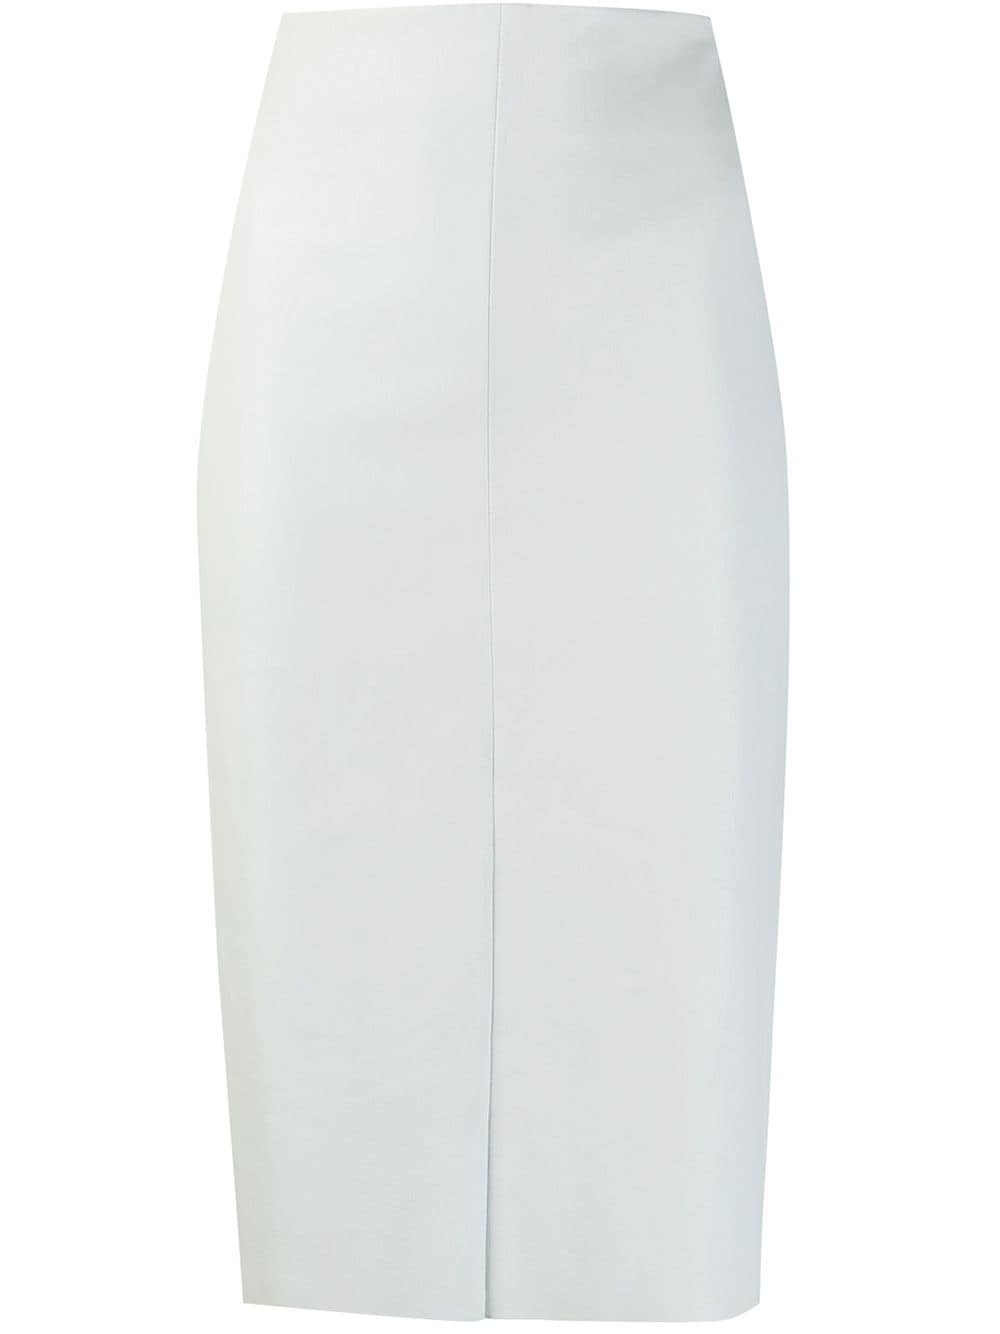 Shop Drome classic pencil skirt with Express Delivery - FARFETCH